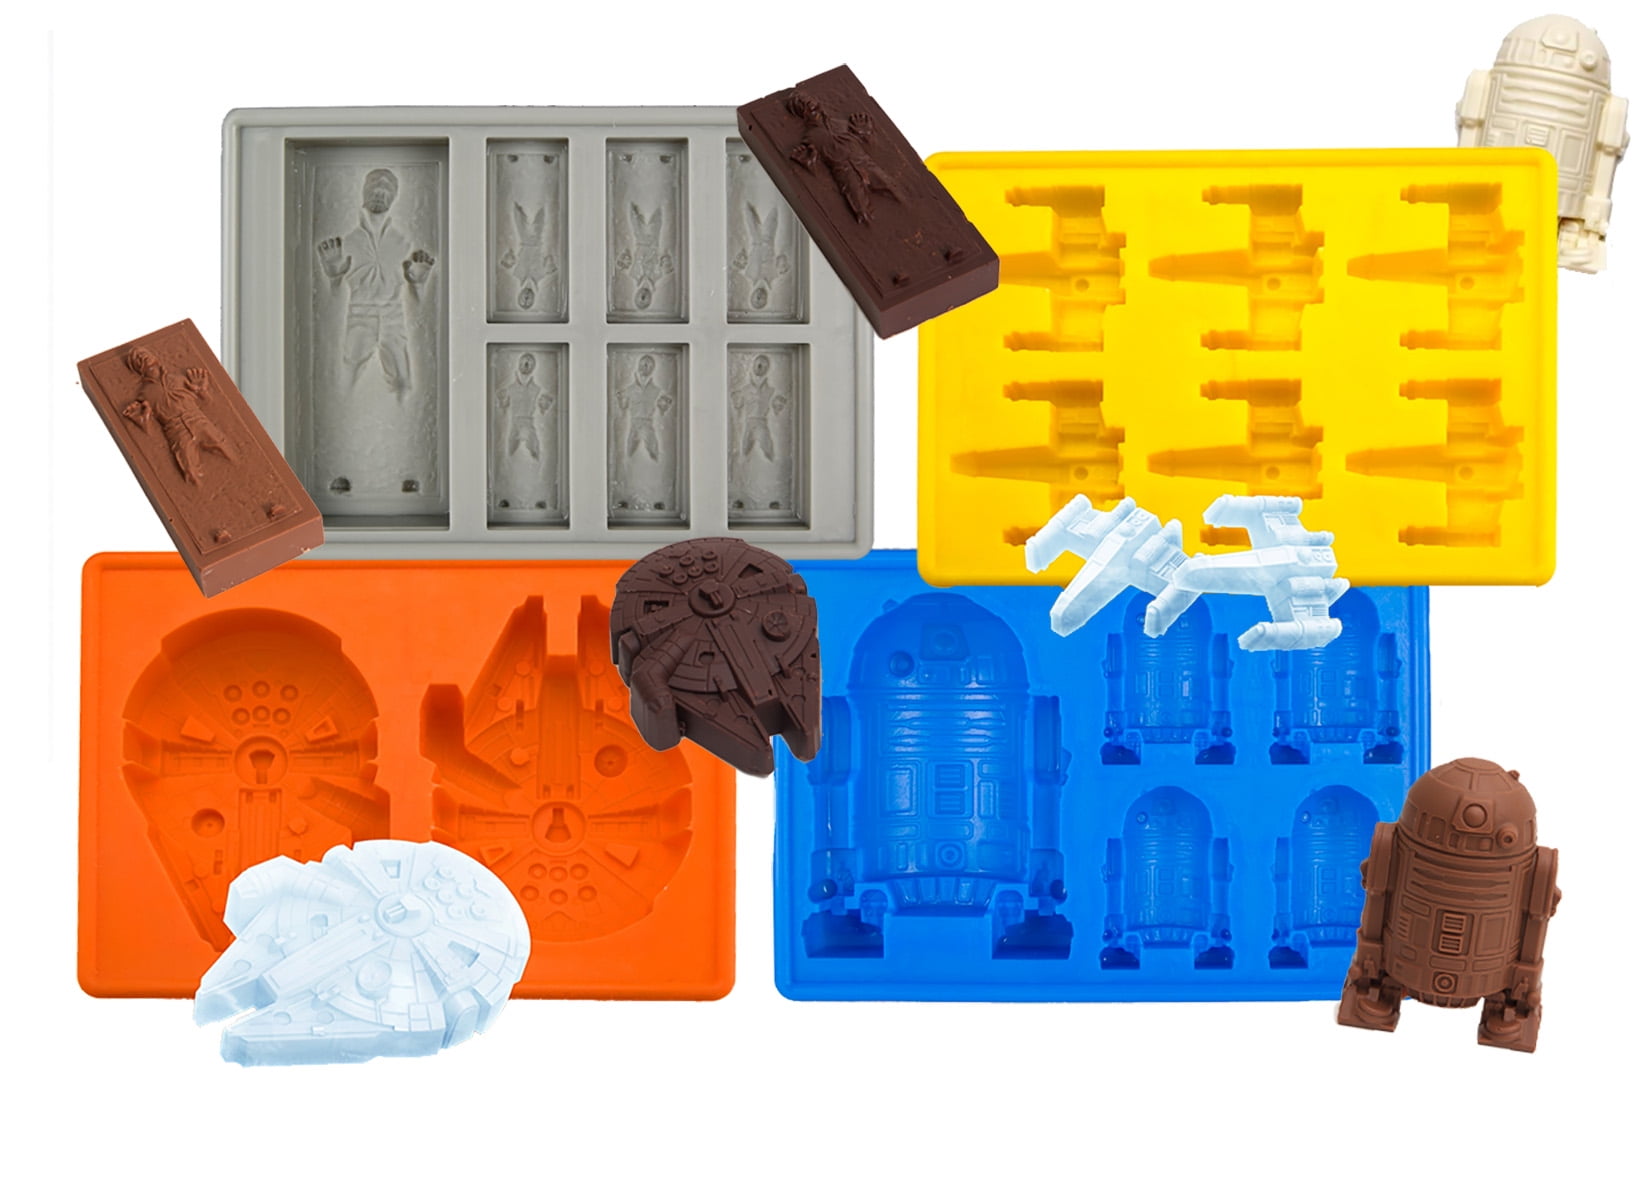 STAR WARS X WING FIGHTER SILICONE BIRTHDAY CAKE CANDY CHOCOLATE MOLD ICE TRAY 